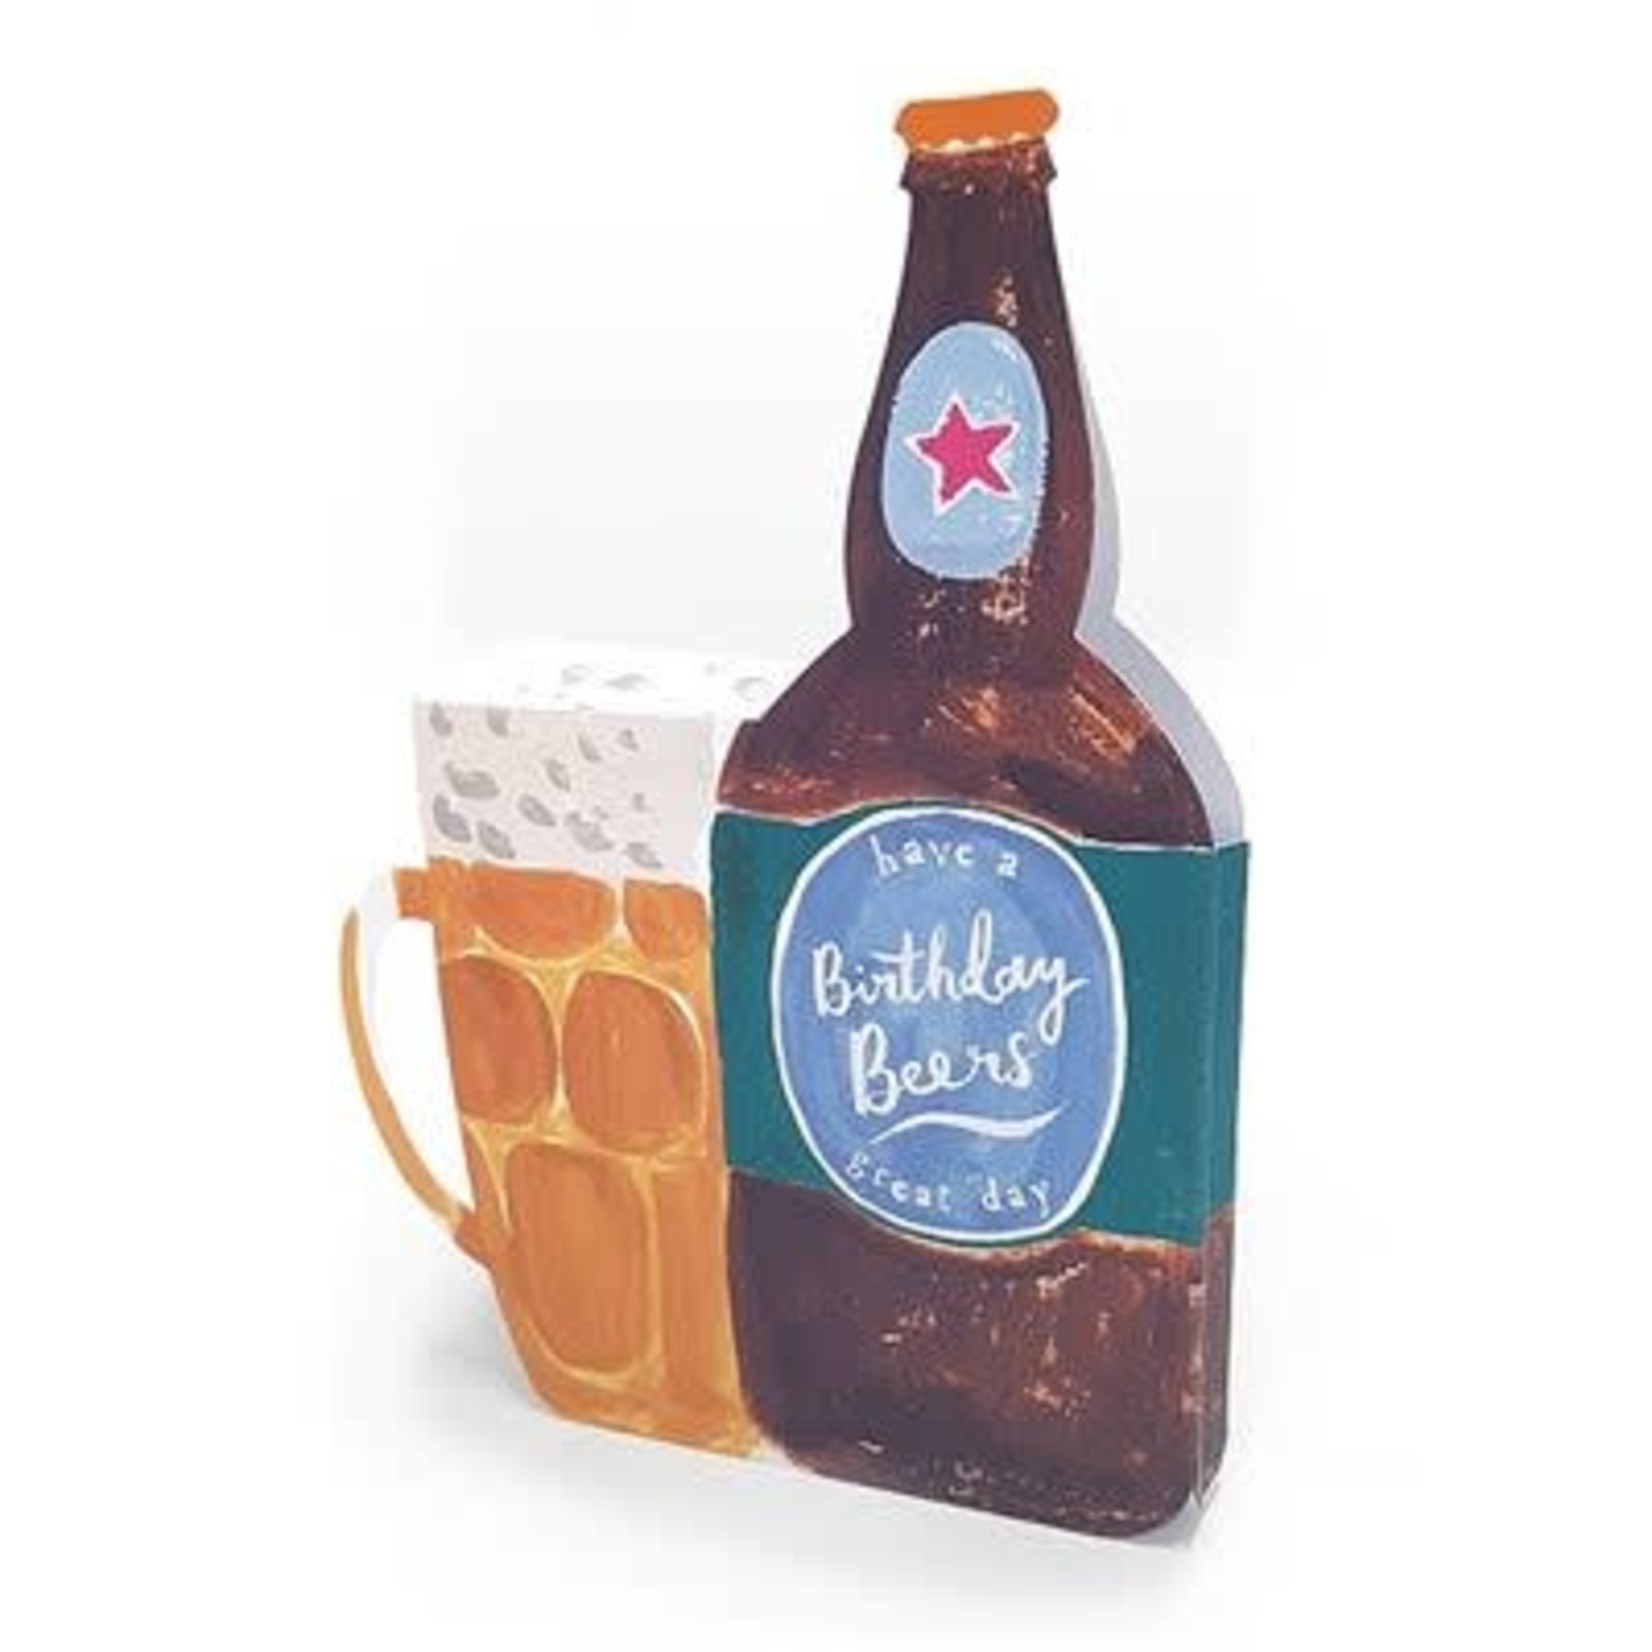 Hotchpotch Birthday Beers Greeting Card